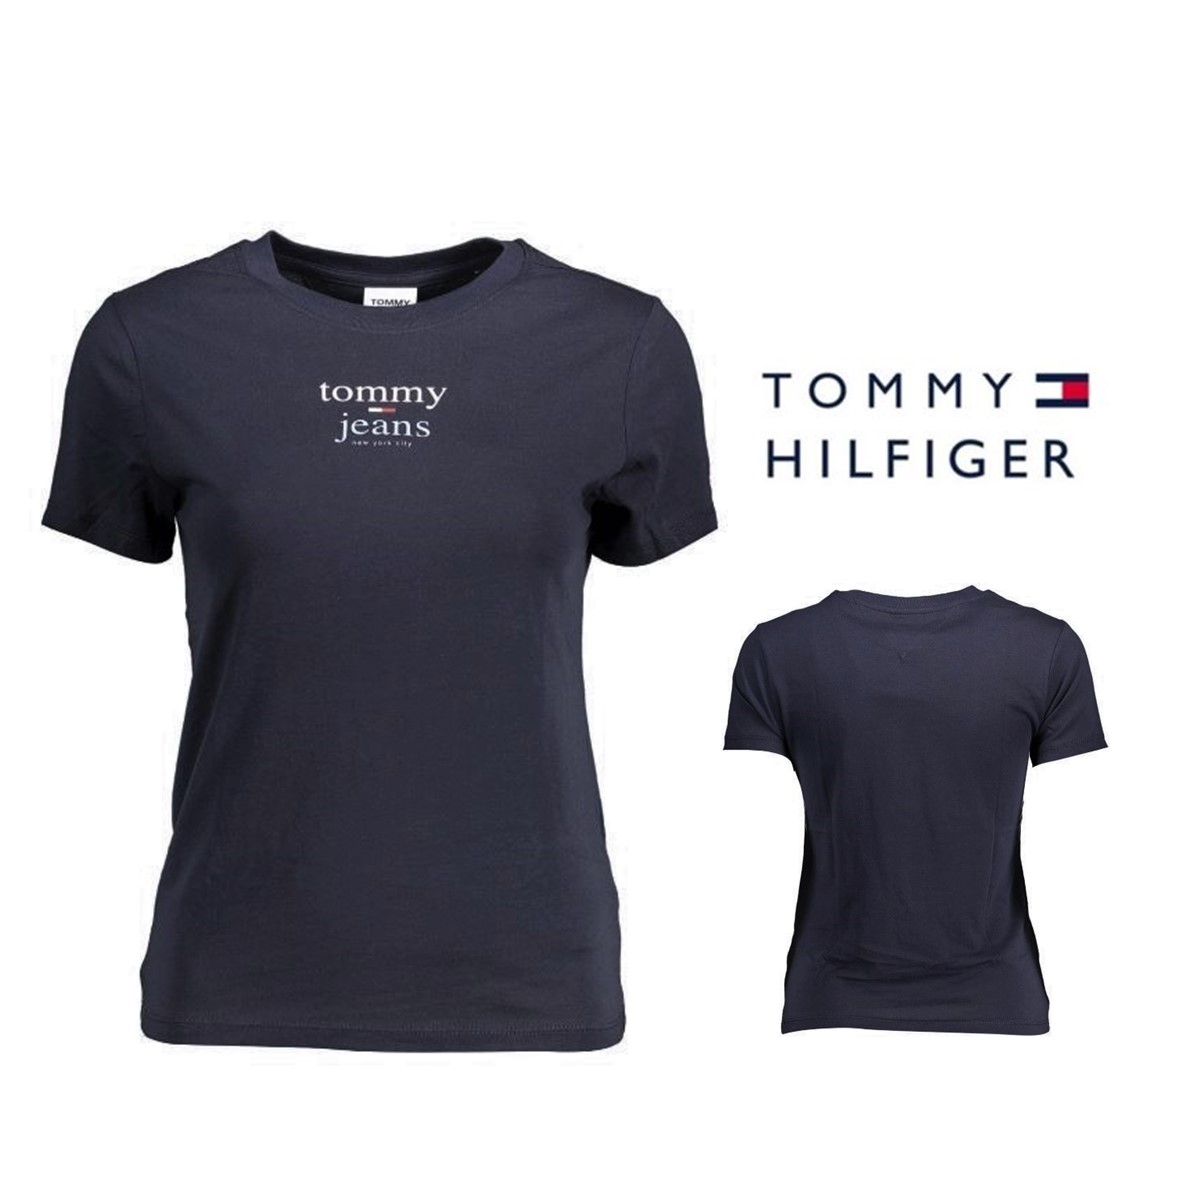 T-shirts e tops para mulheres da TOMMY HILFIGER » ABOUT YOU